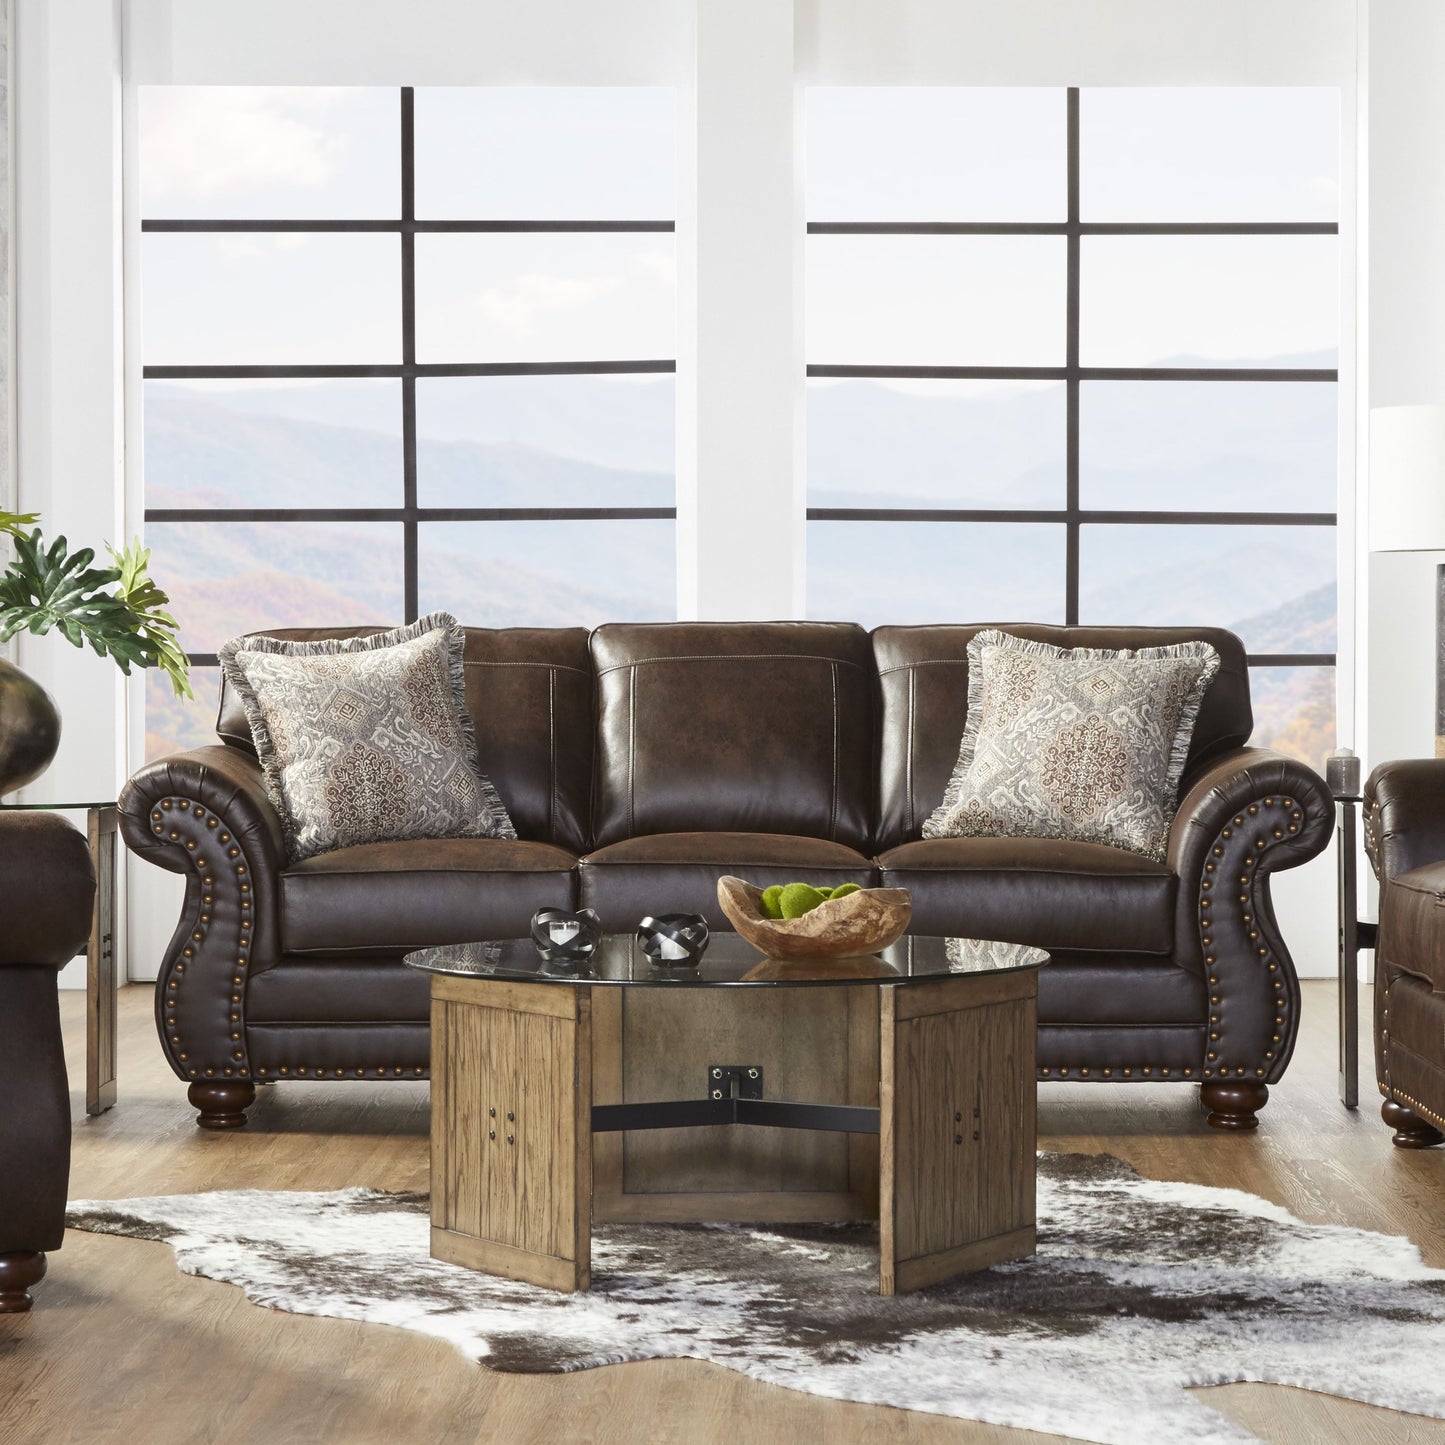 Leinster Faux Leather Upholstered Nailhead Sofa in Espresso